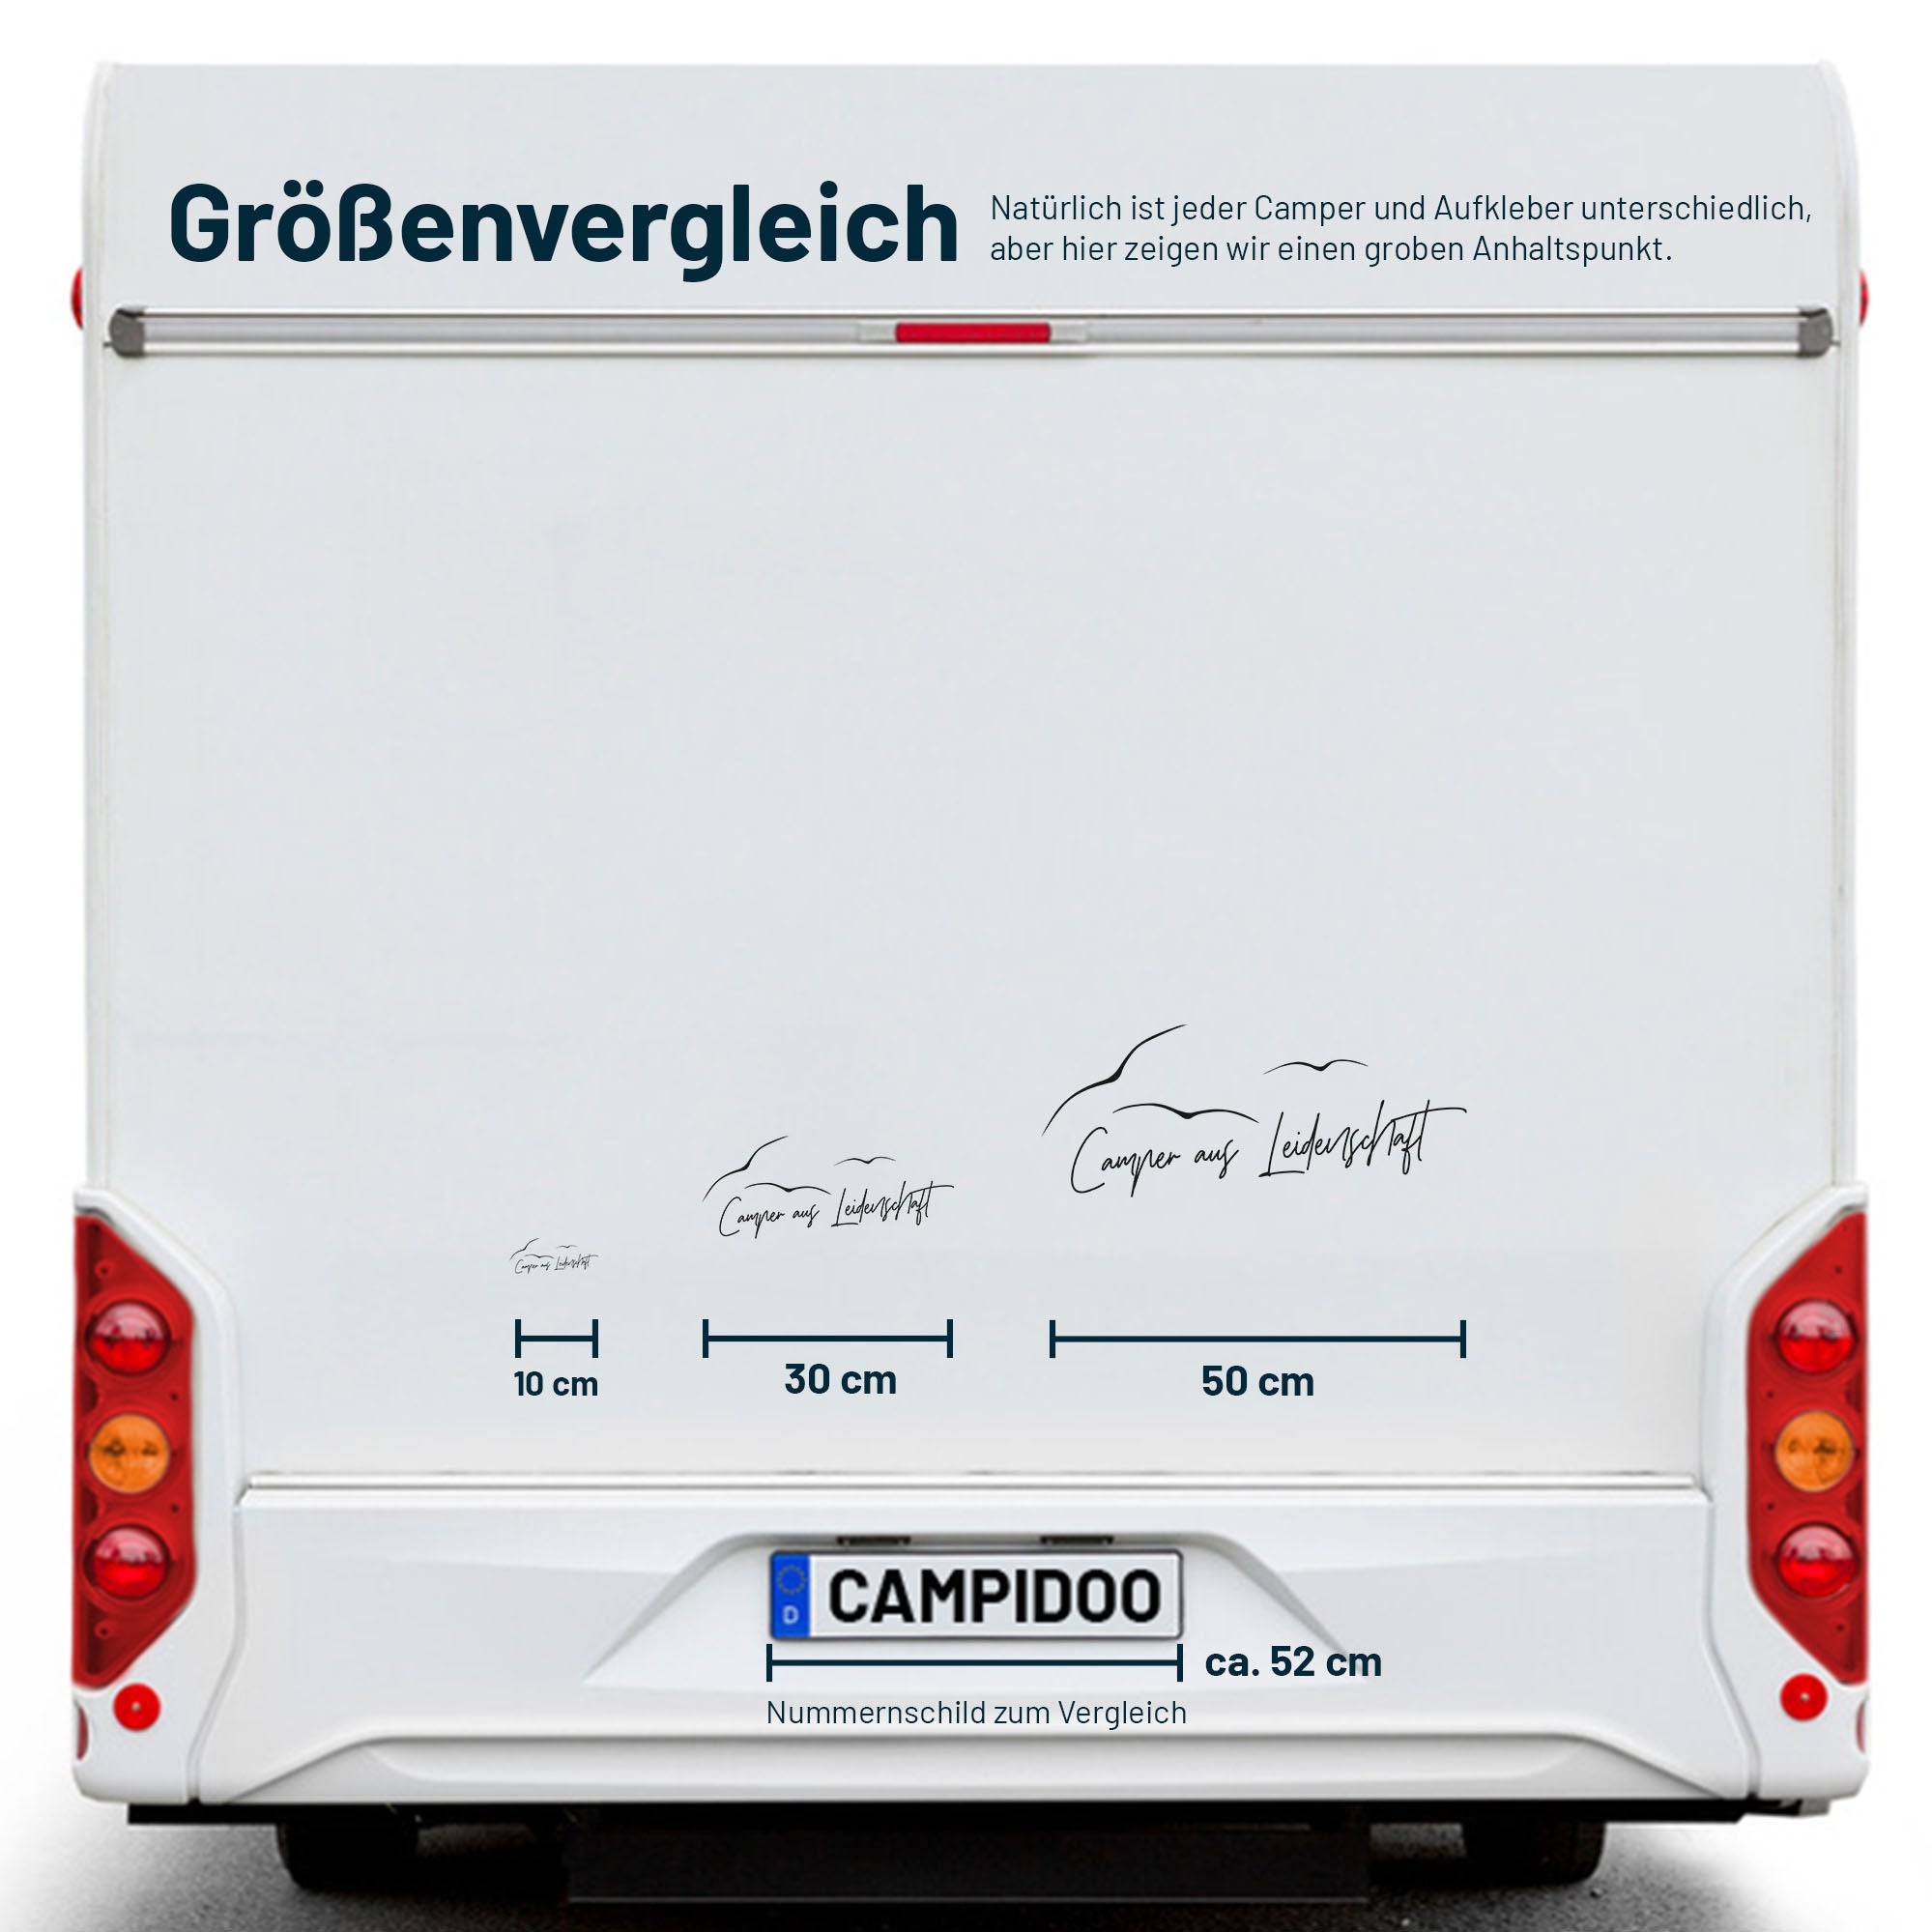 Camping sticker "Camper with passion"